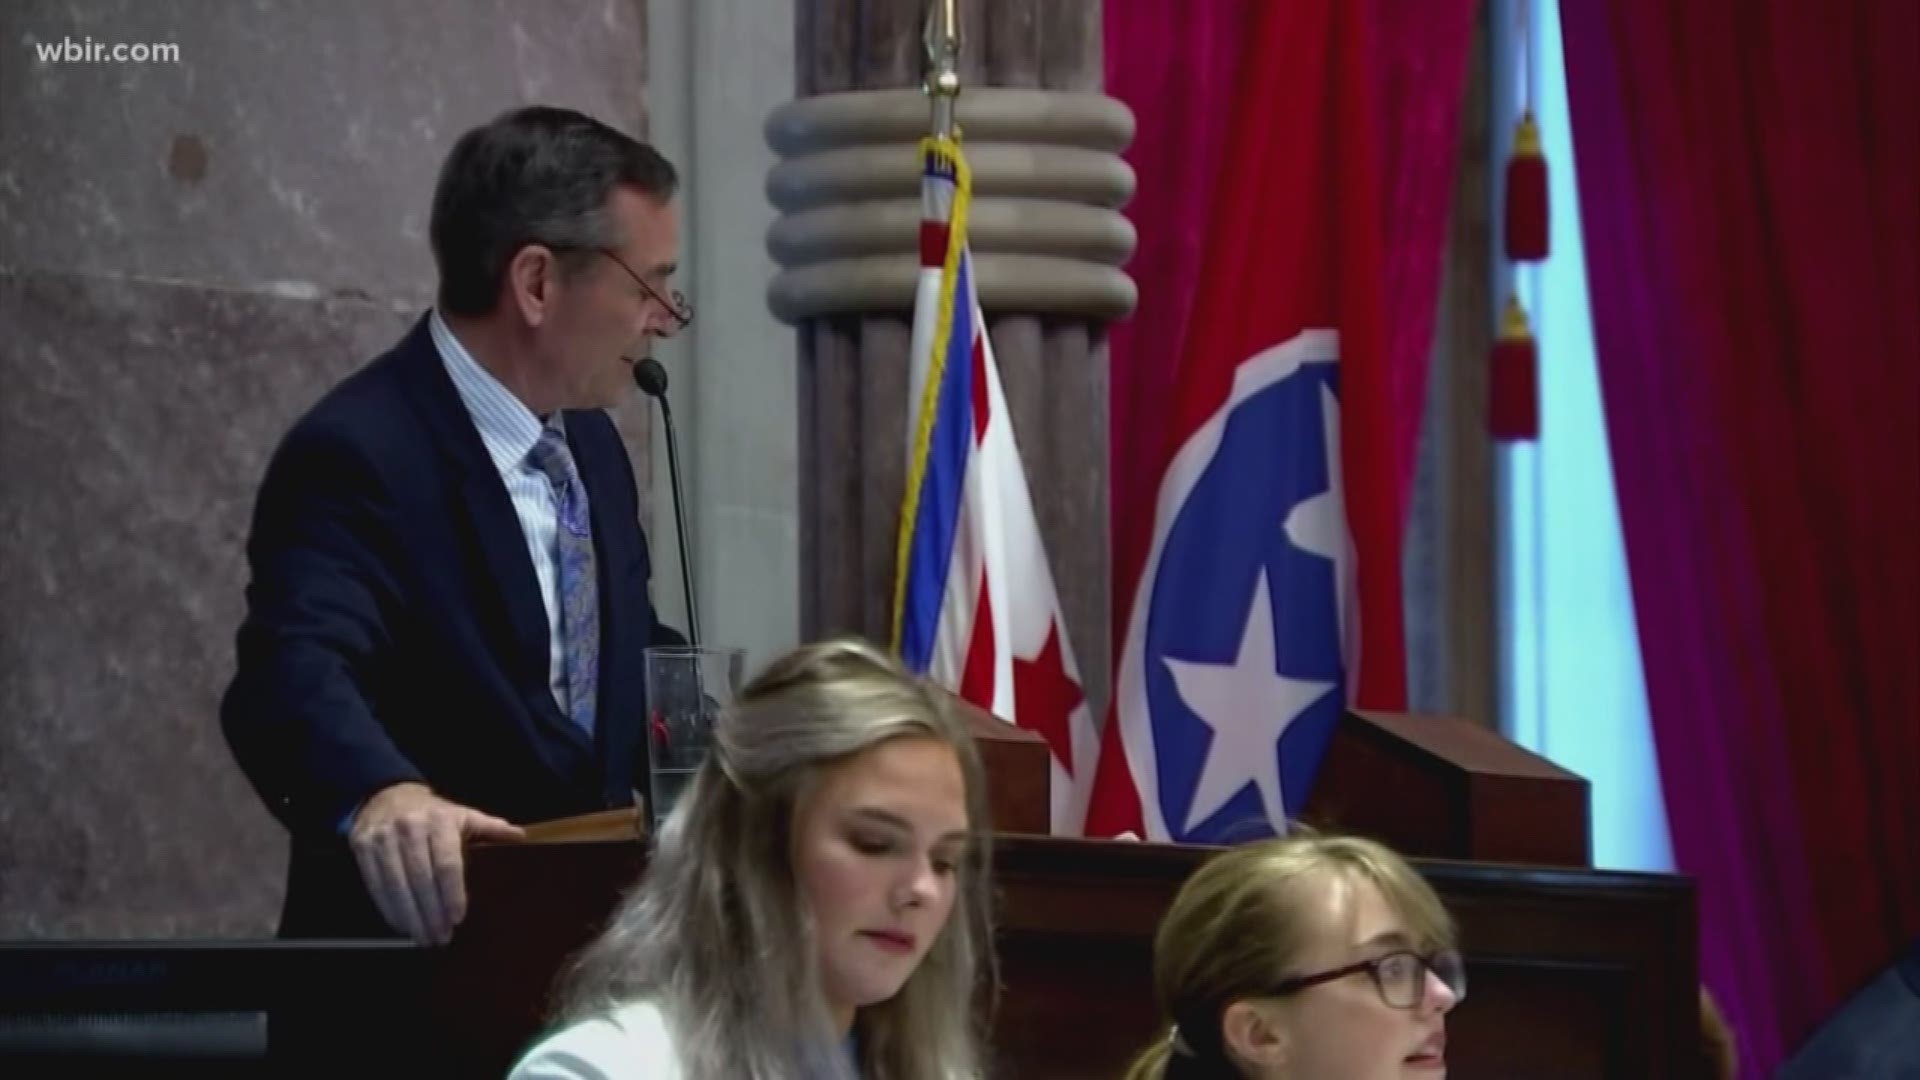 Glen Casada said he will resign on August 2nd from his position as House Speaker. He spent time on the hot seat last month for lewd texts between him and his former Chief of Staff.